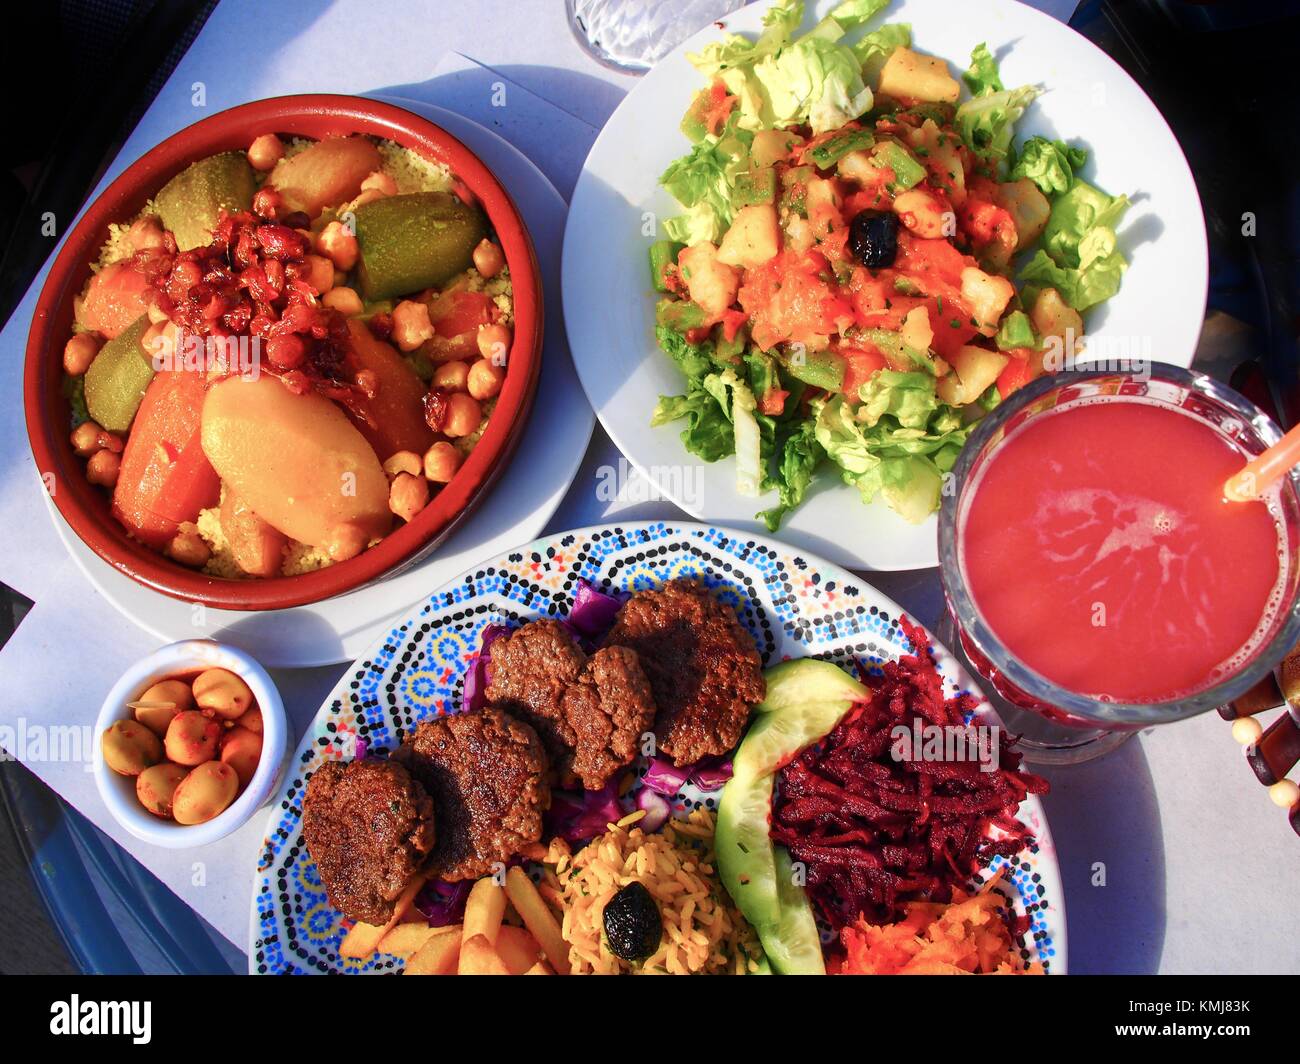 Morocco, Food, Couscous,olives, ''Kefta'' meat, moroccan salad, and grenade fruit juice. Stock Photo